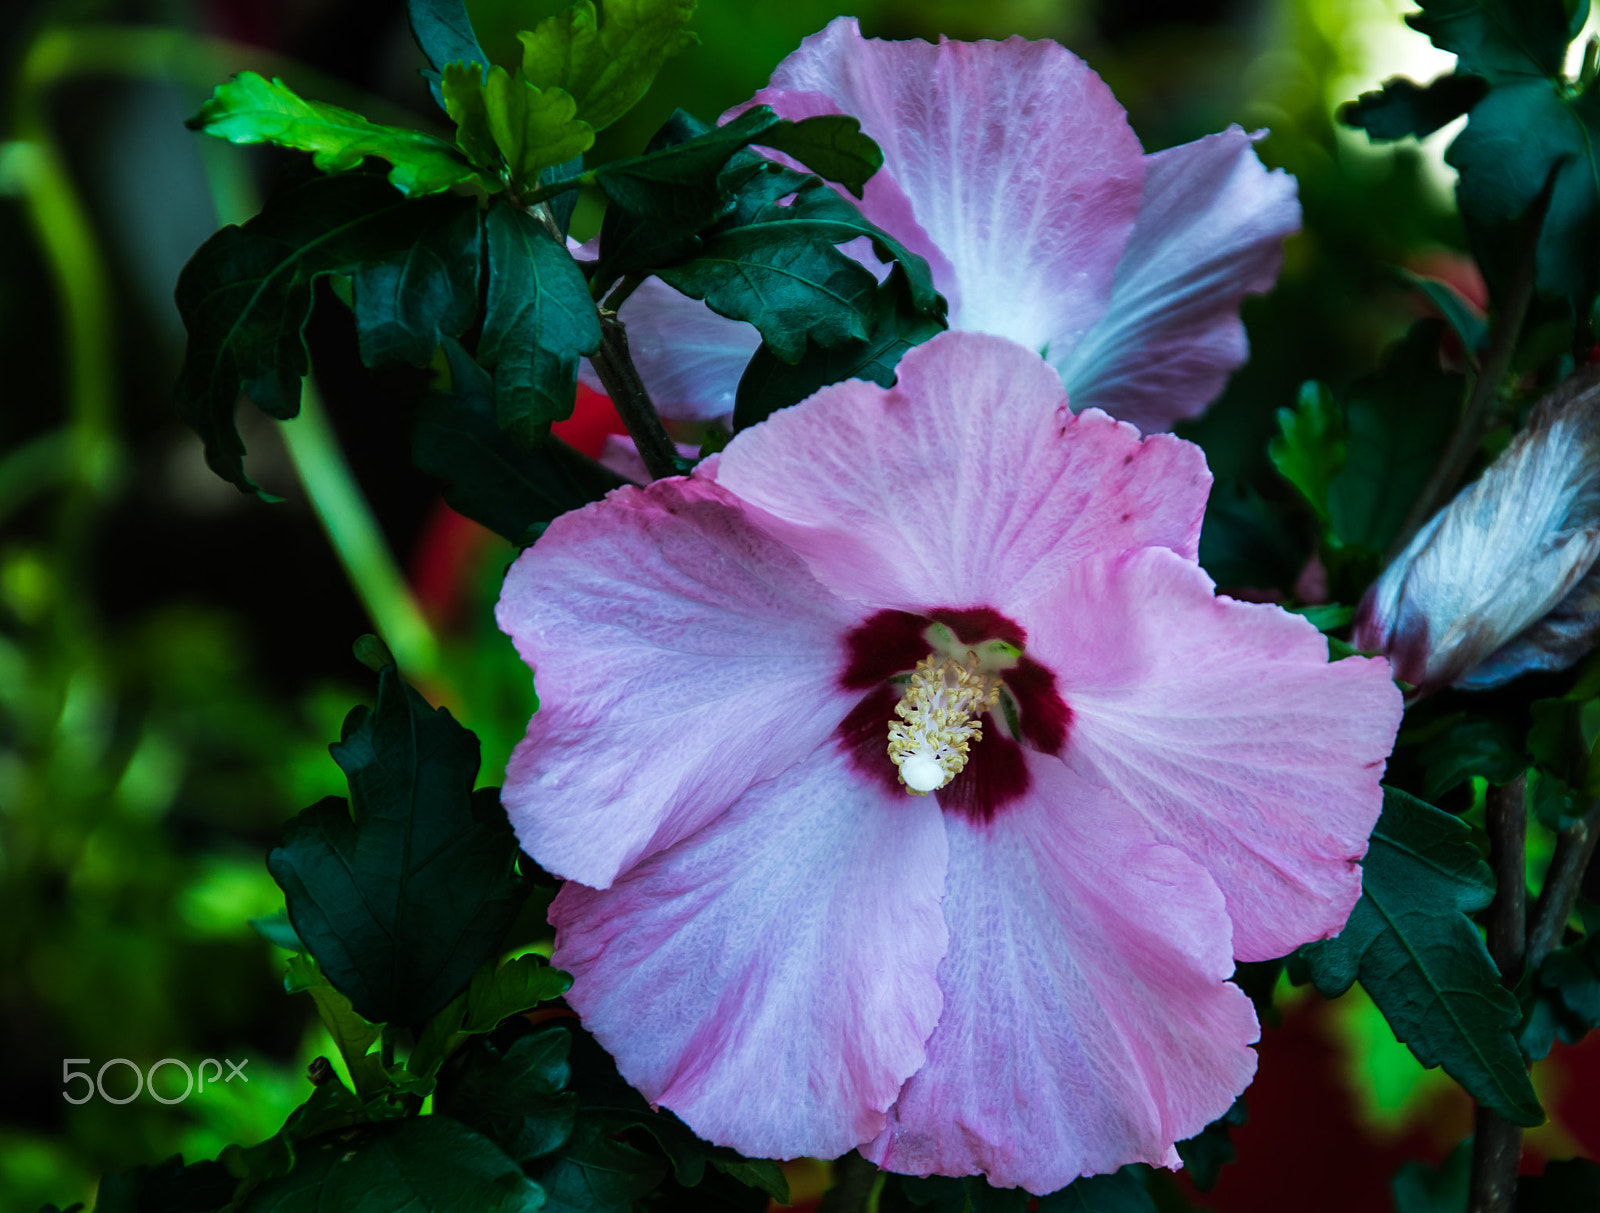 Nikon D810 + Nikon AF-S DX Nikkor 18-105mm F3.5-5.6G ED VR sample photo. Another rare hibiscus from our daughter's garden photography